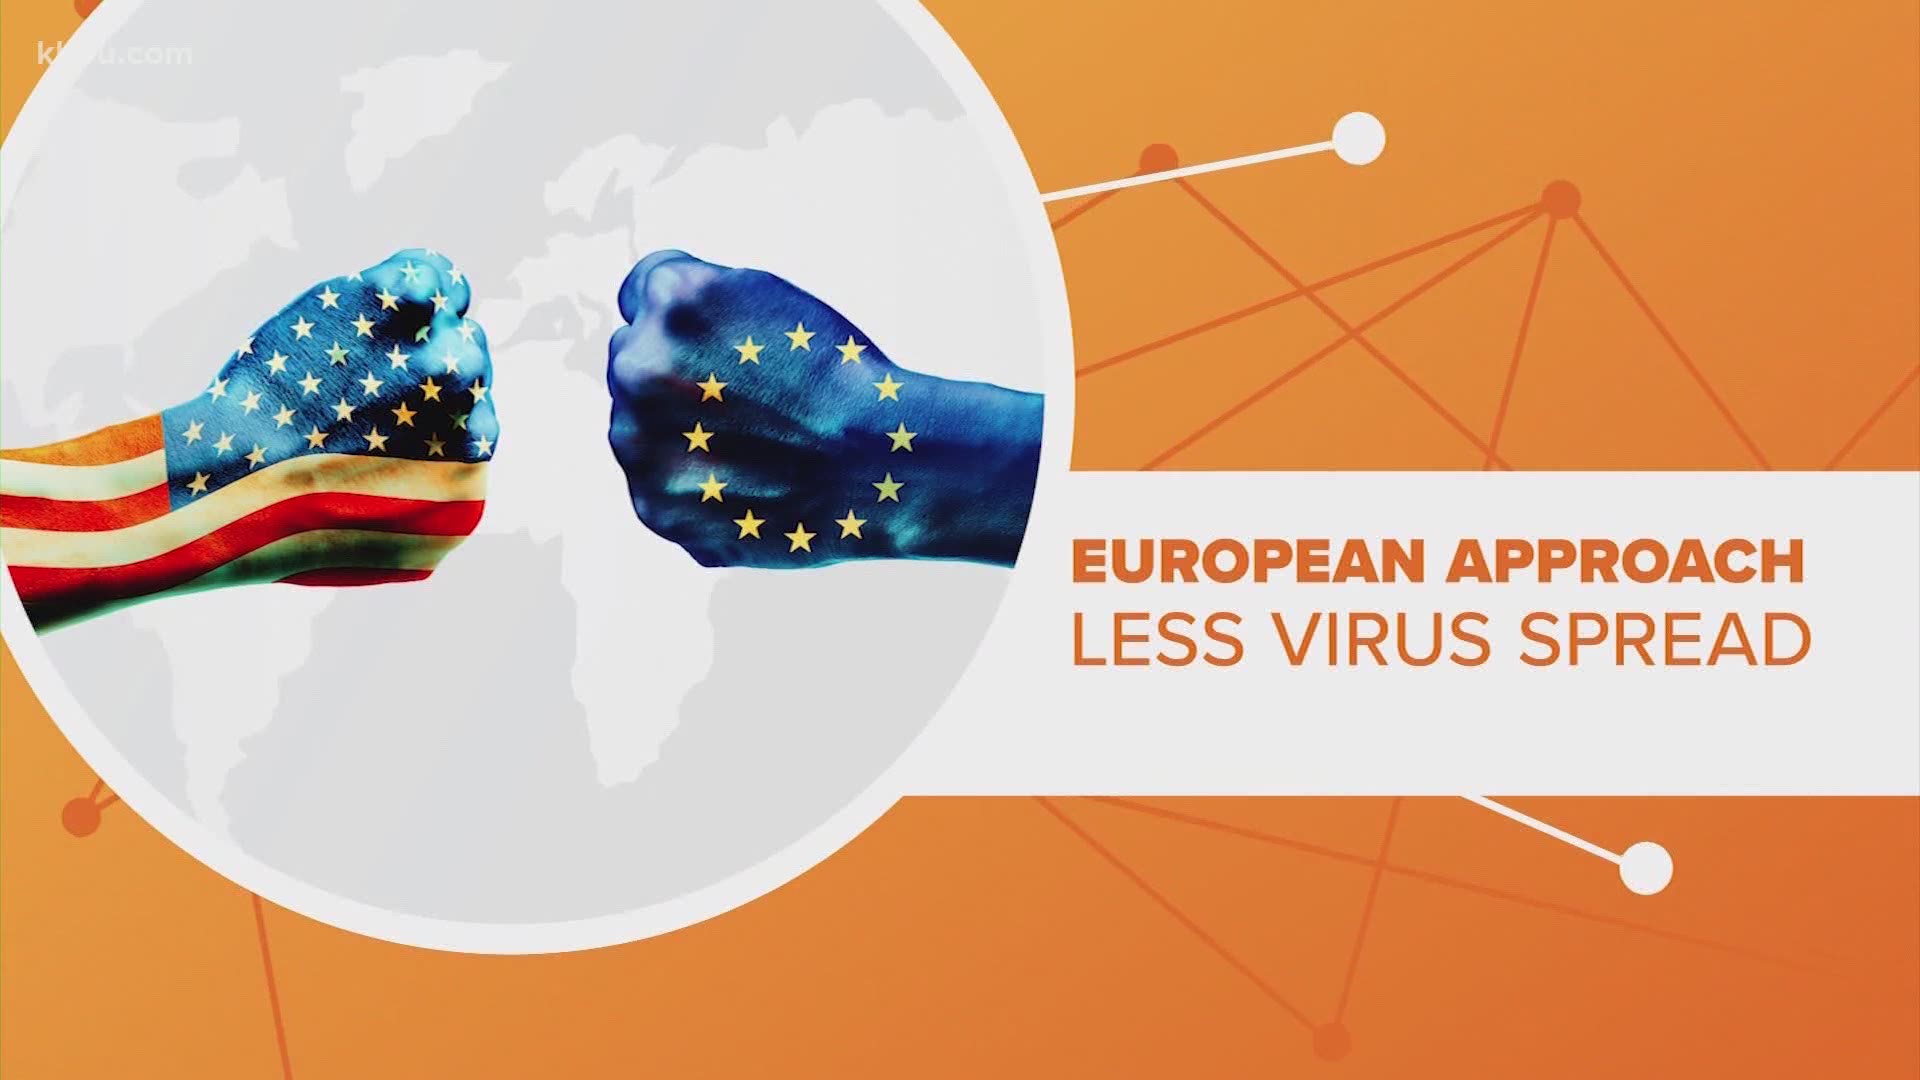 The U.S. has it's own approach to handling the COVID-19 pandemic, but how does it stack up against to government response in Europe? Let's connect the dots!